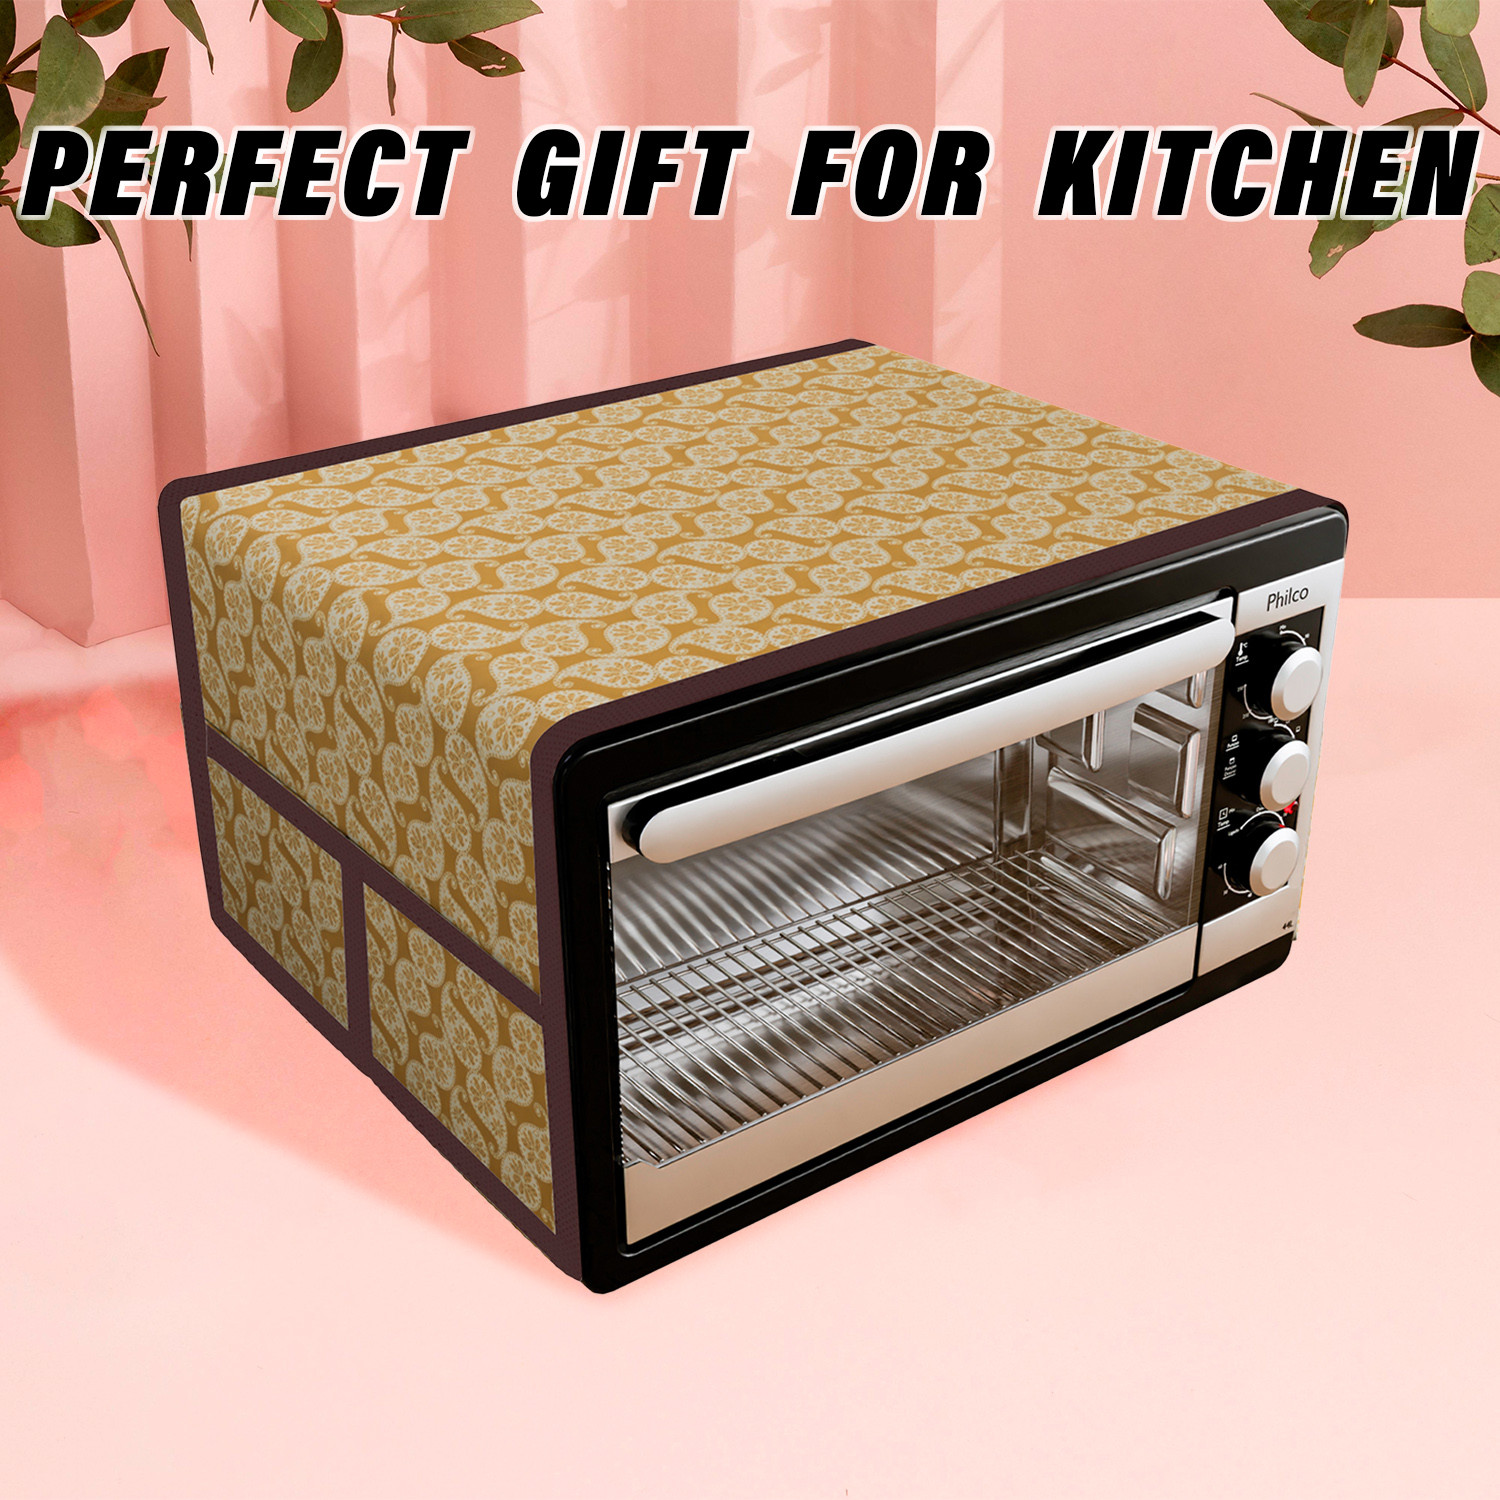 Kuber Industries Oven Top Cover | Microwave Oven Top Cover | Microwave Cover with 4 Utility Pockets | Oven Cover for Kitchen Décor | Carry Design Oven Top Cover | 28 LTR | Golden